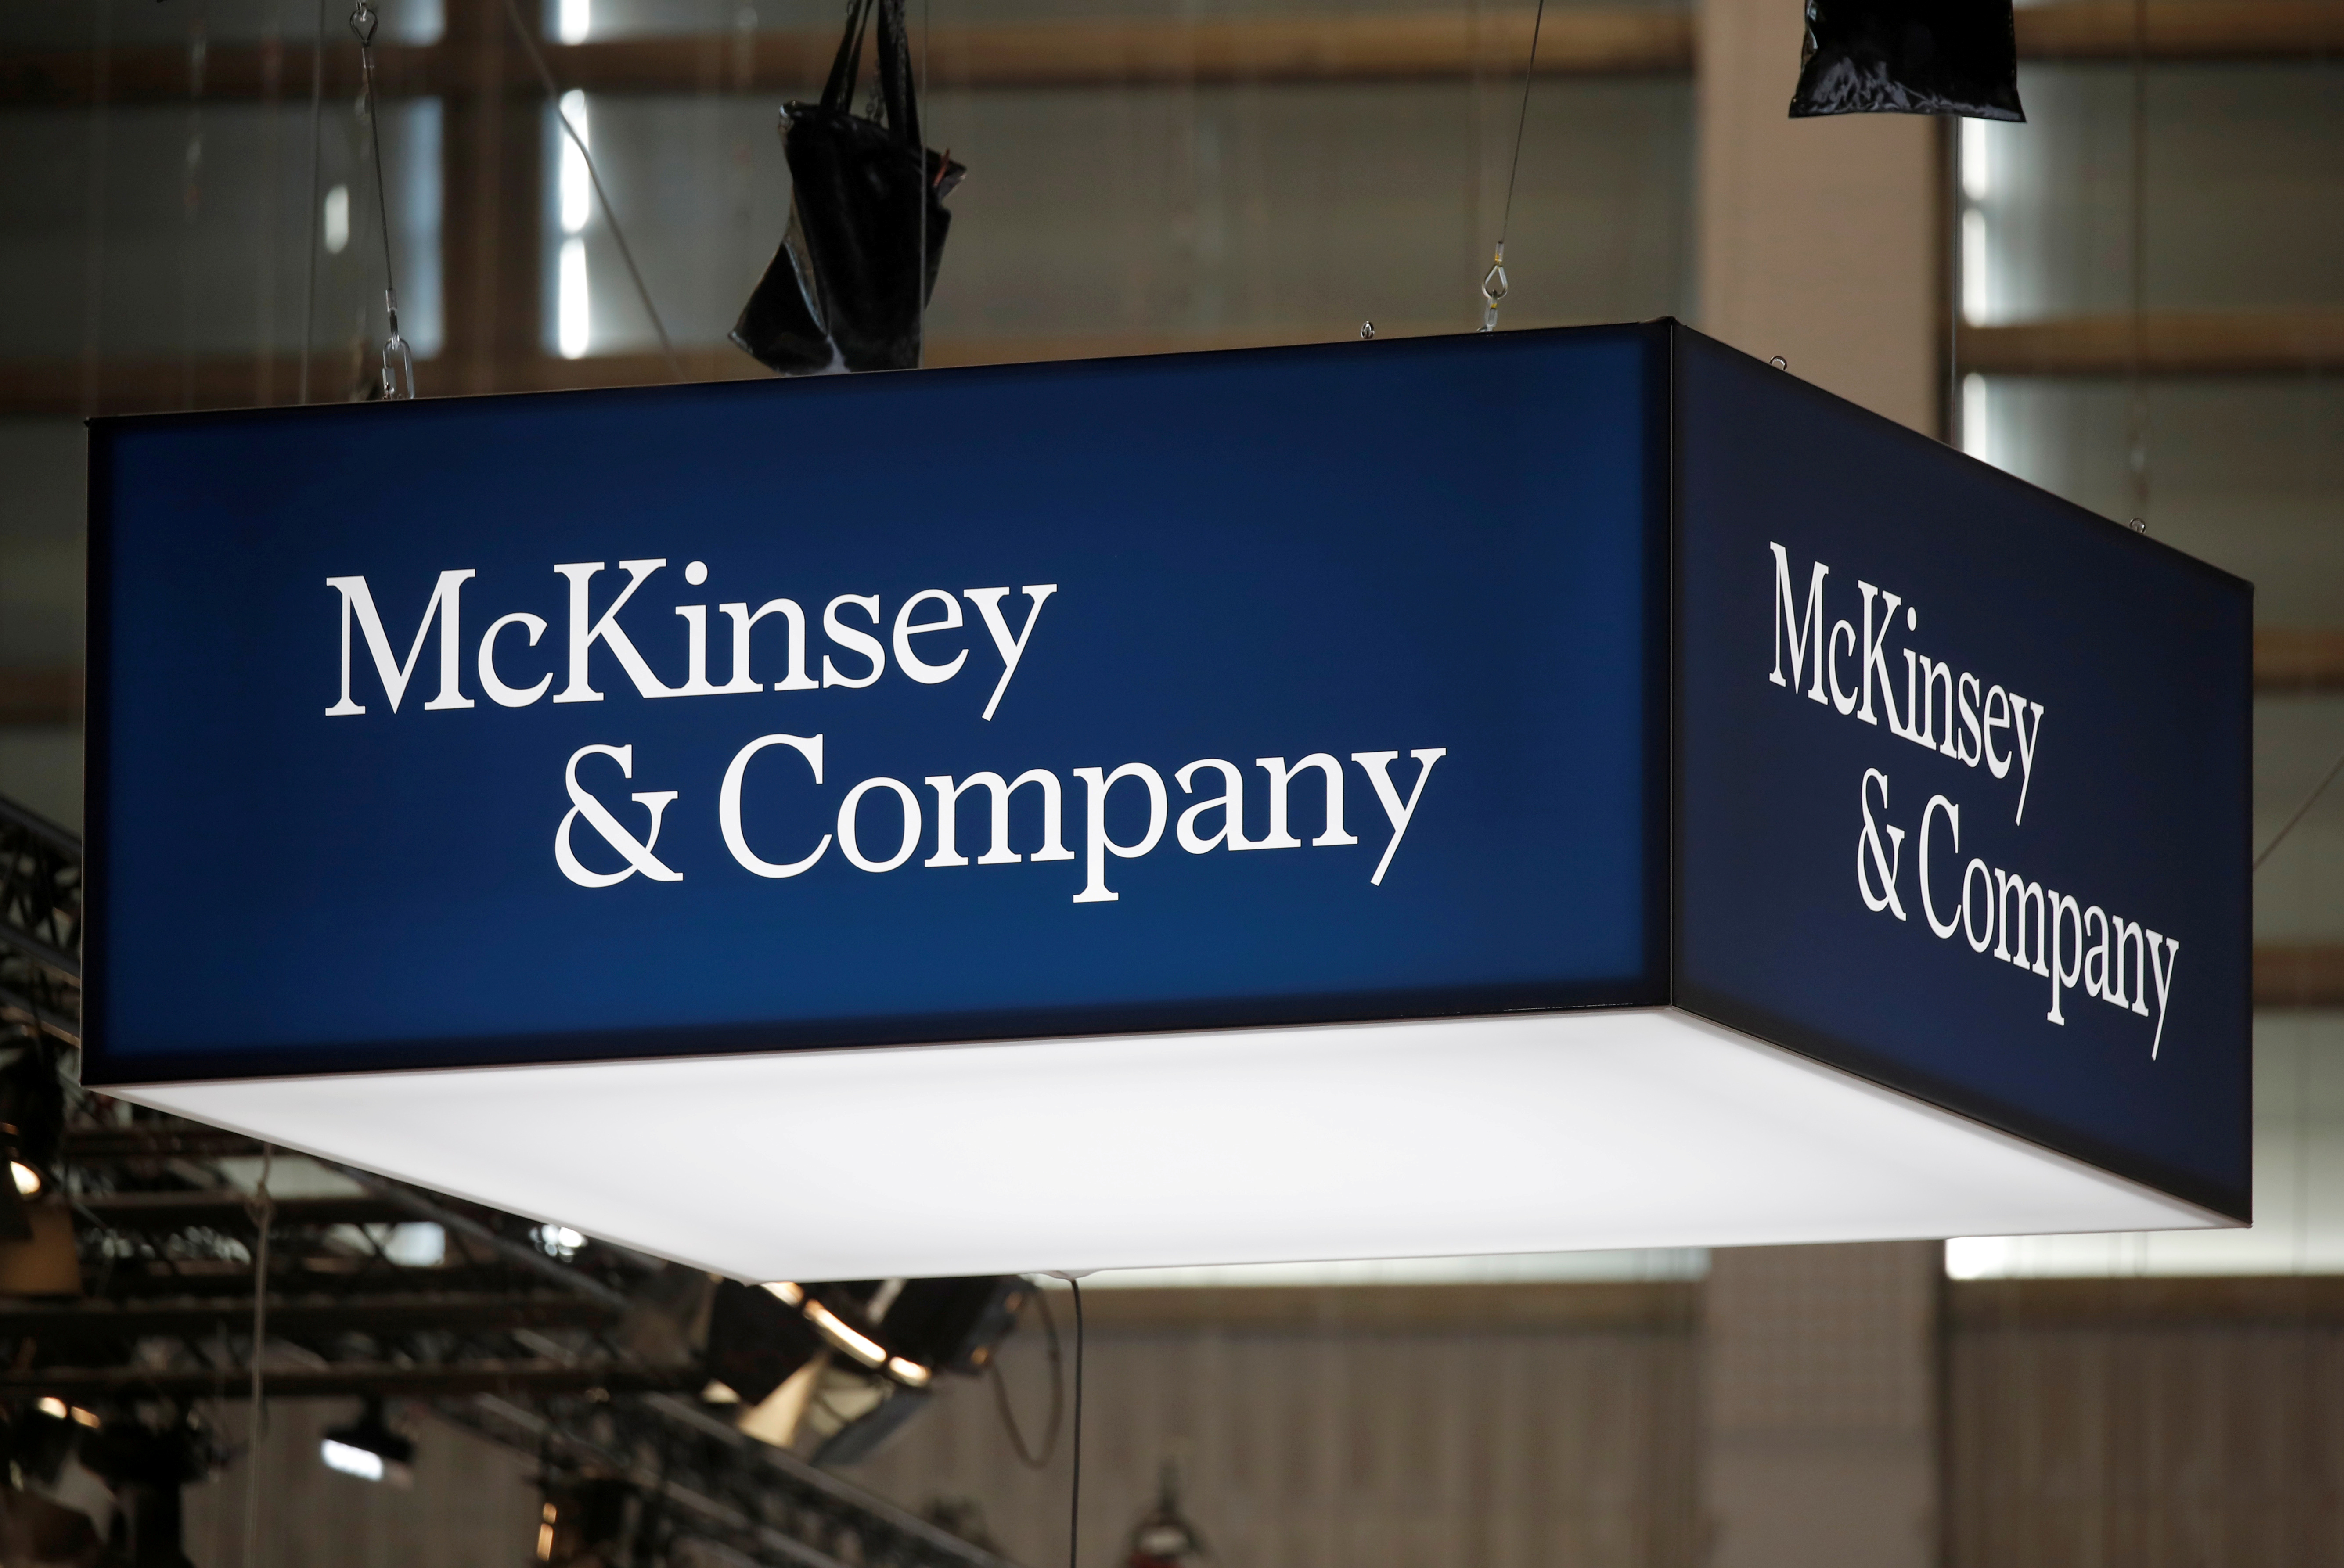 Logo of McKinsey and Company is seen at VivaTech fair in Paris